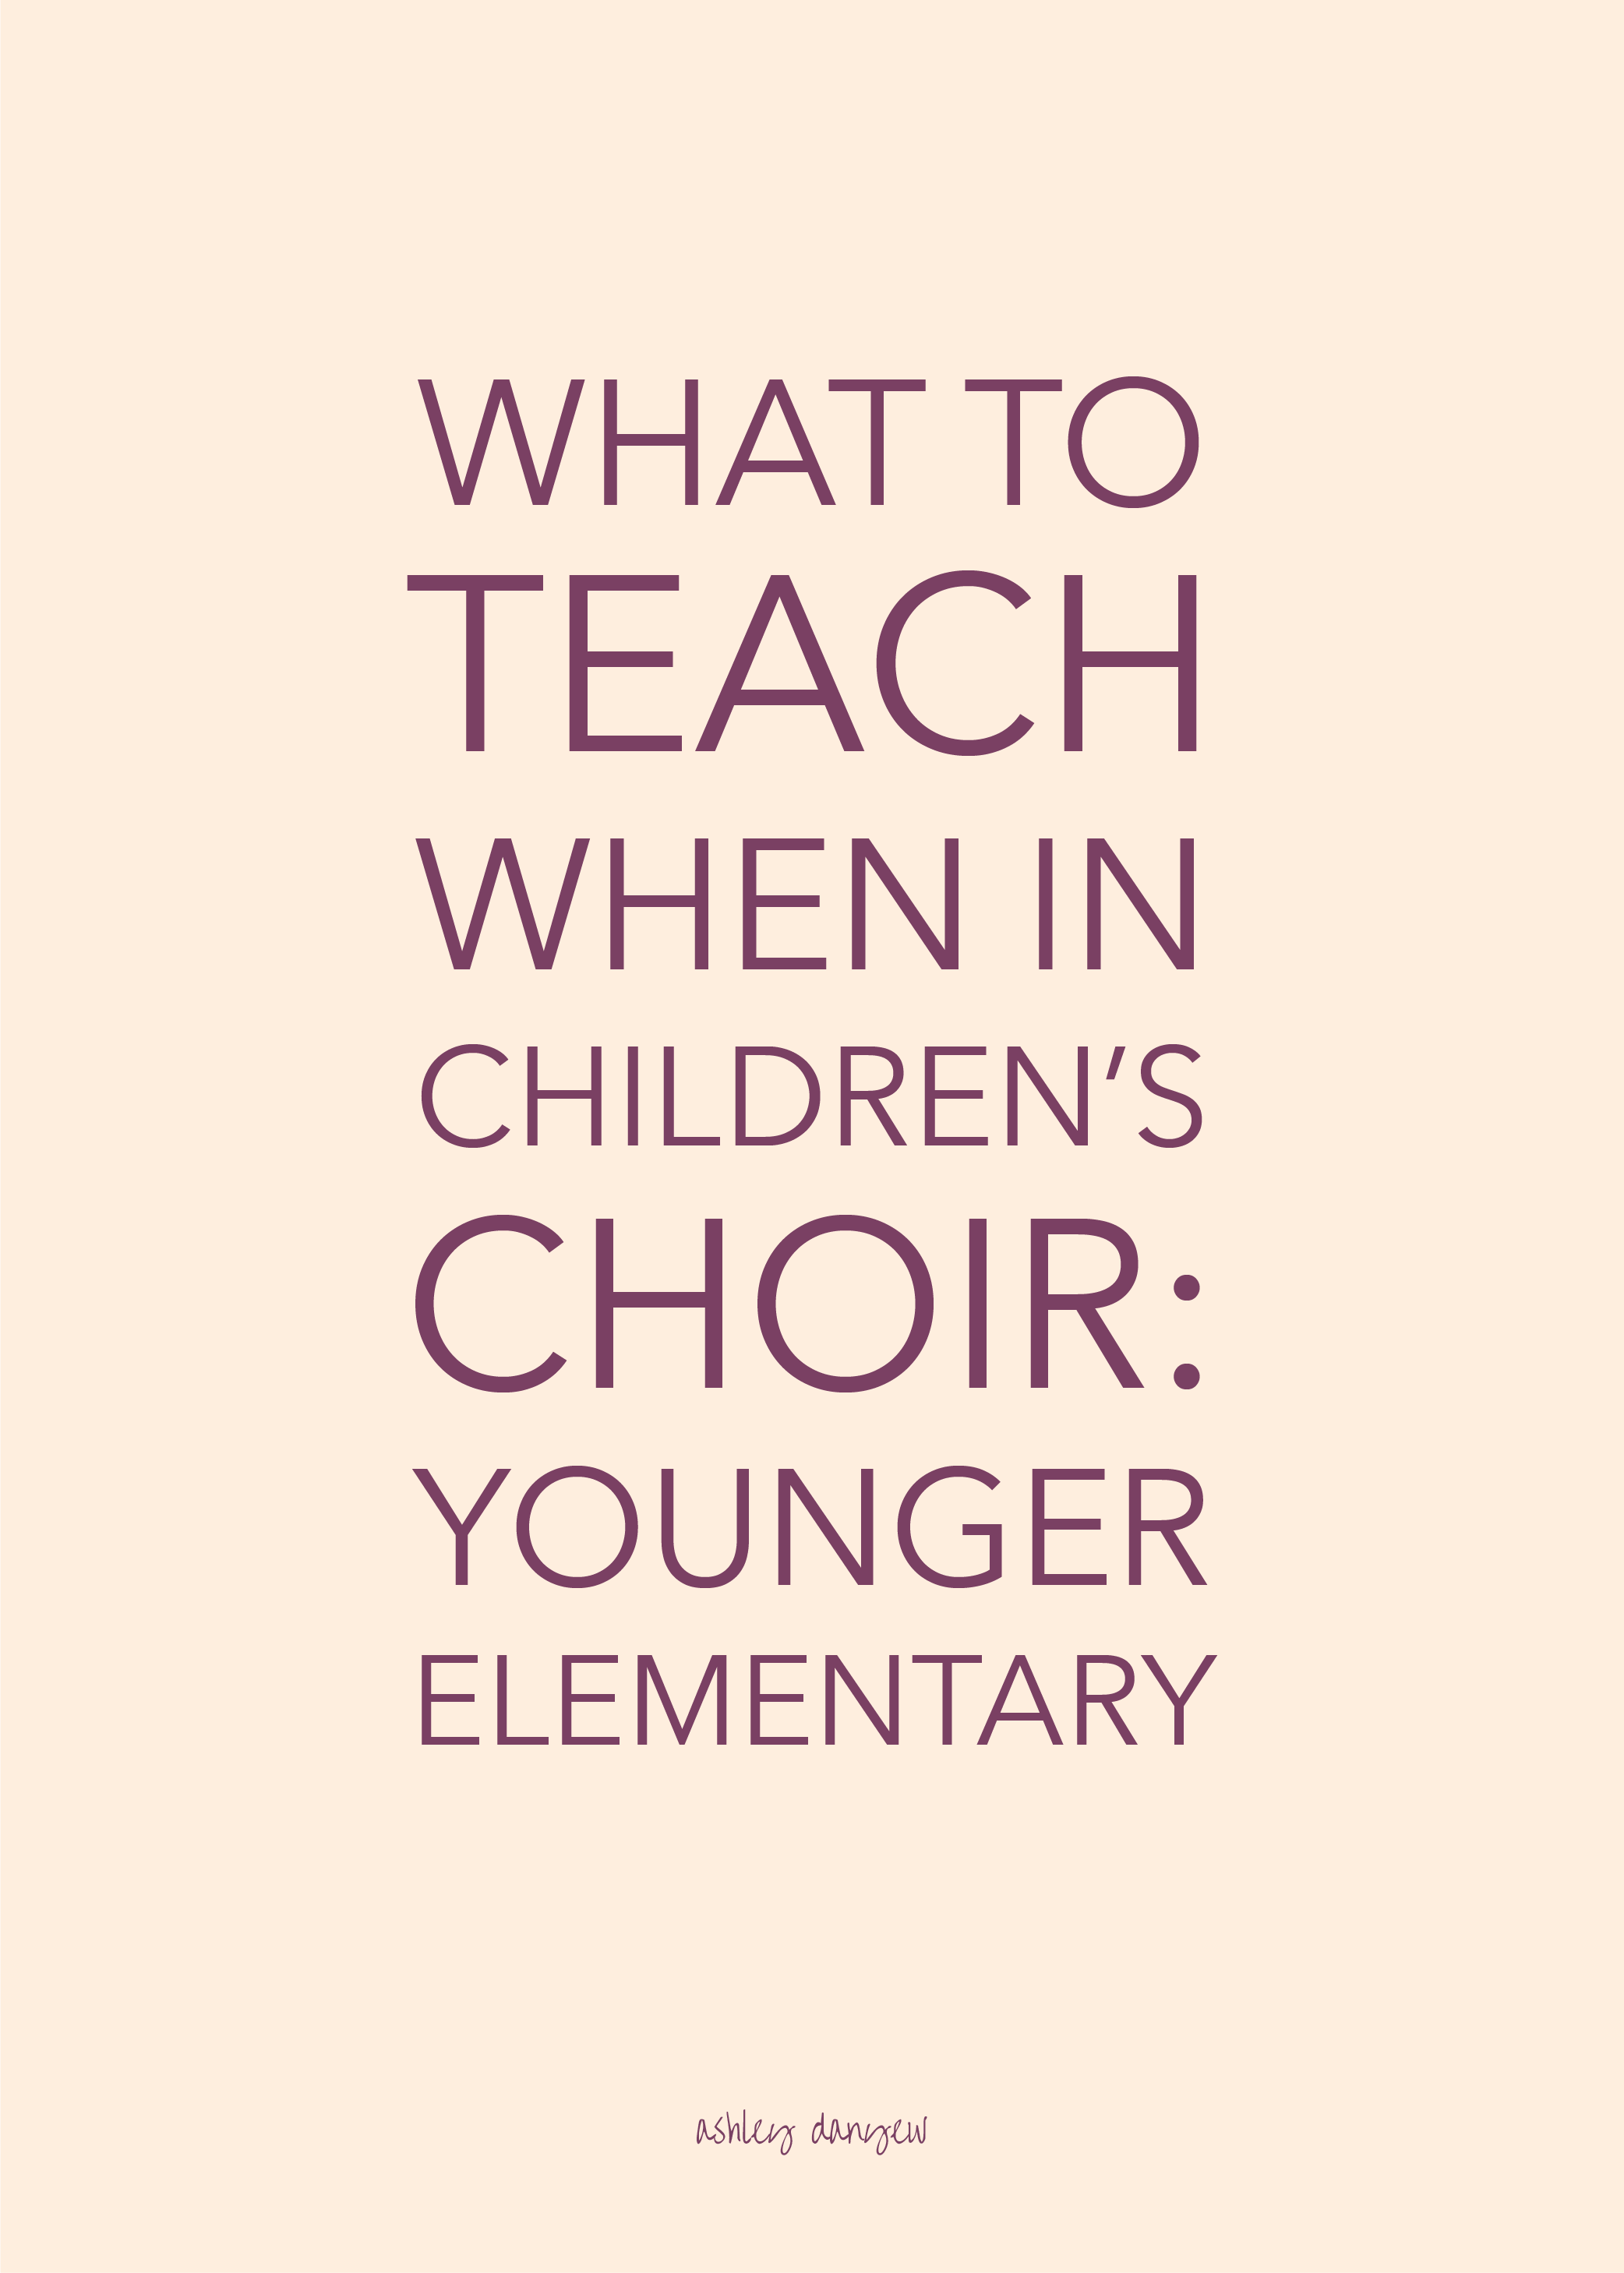 What to Teach When in Children's Choir - Younger Elementary-03.png